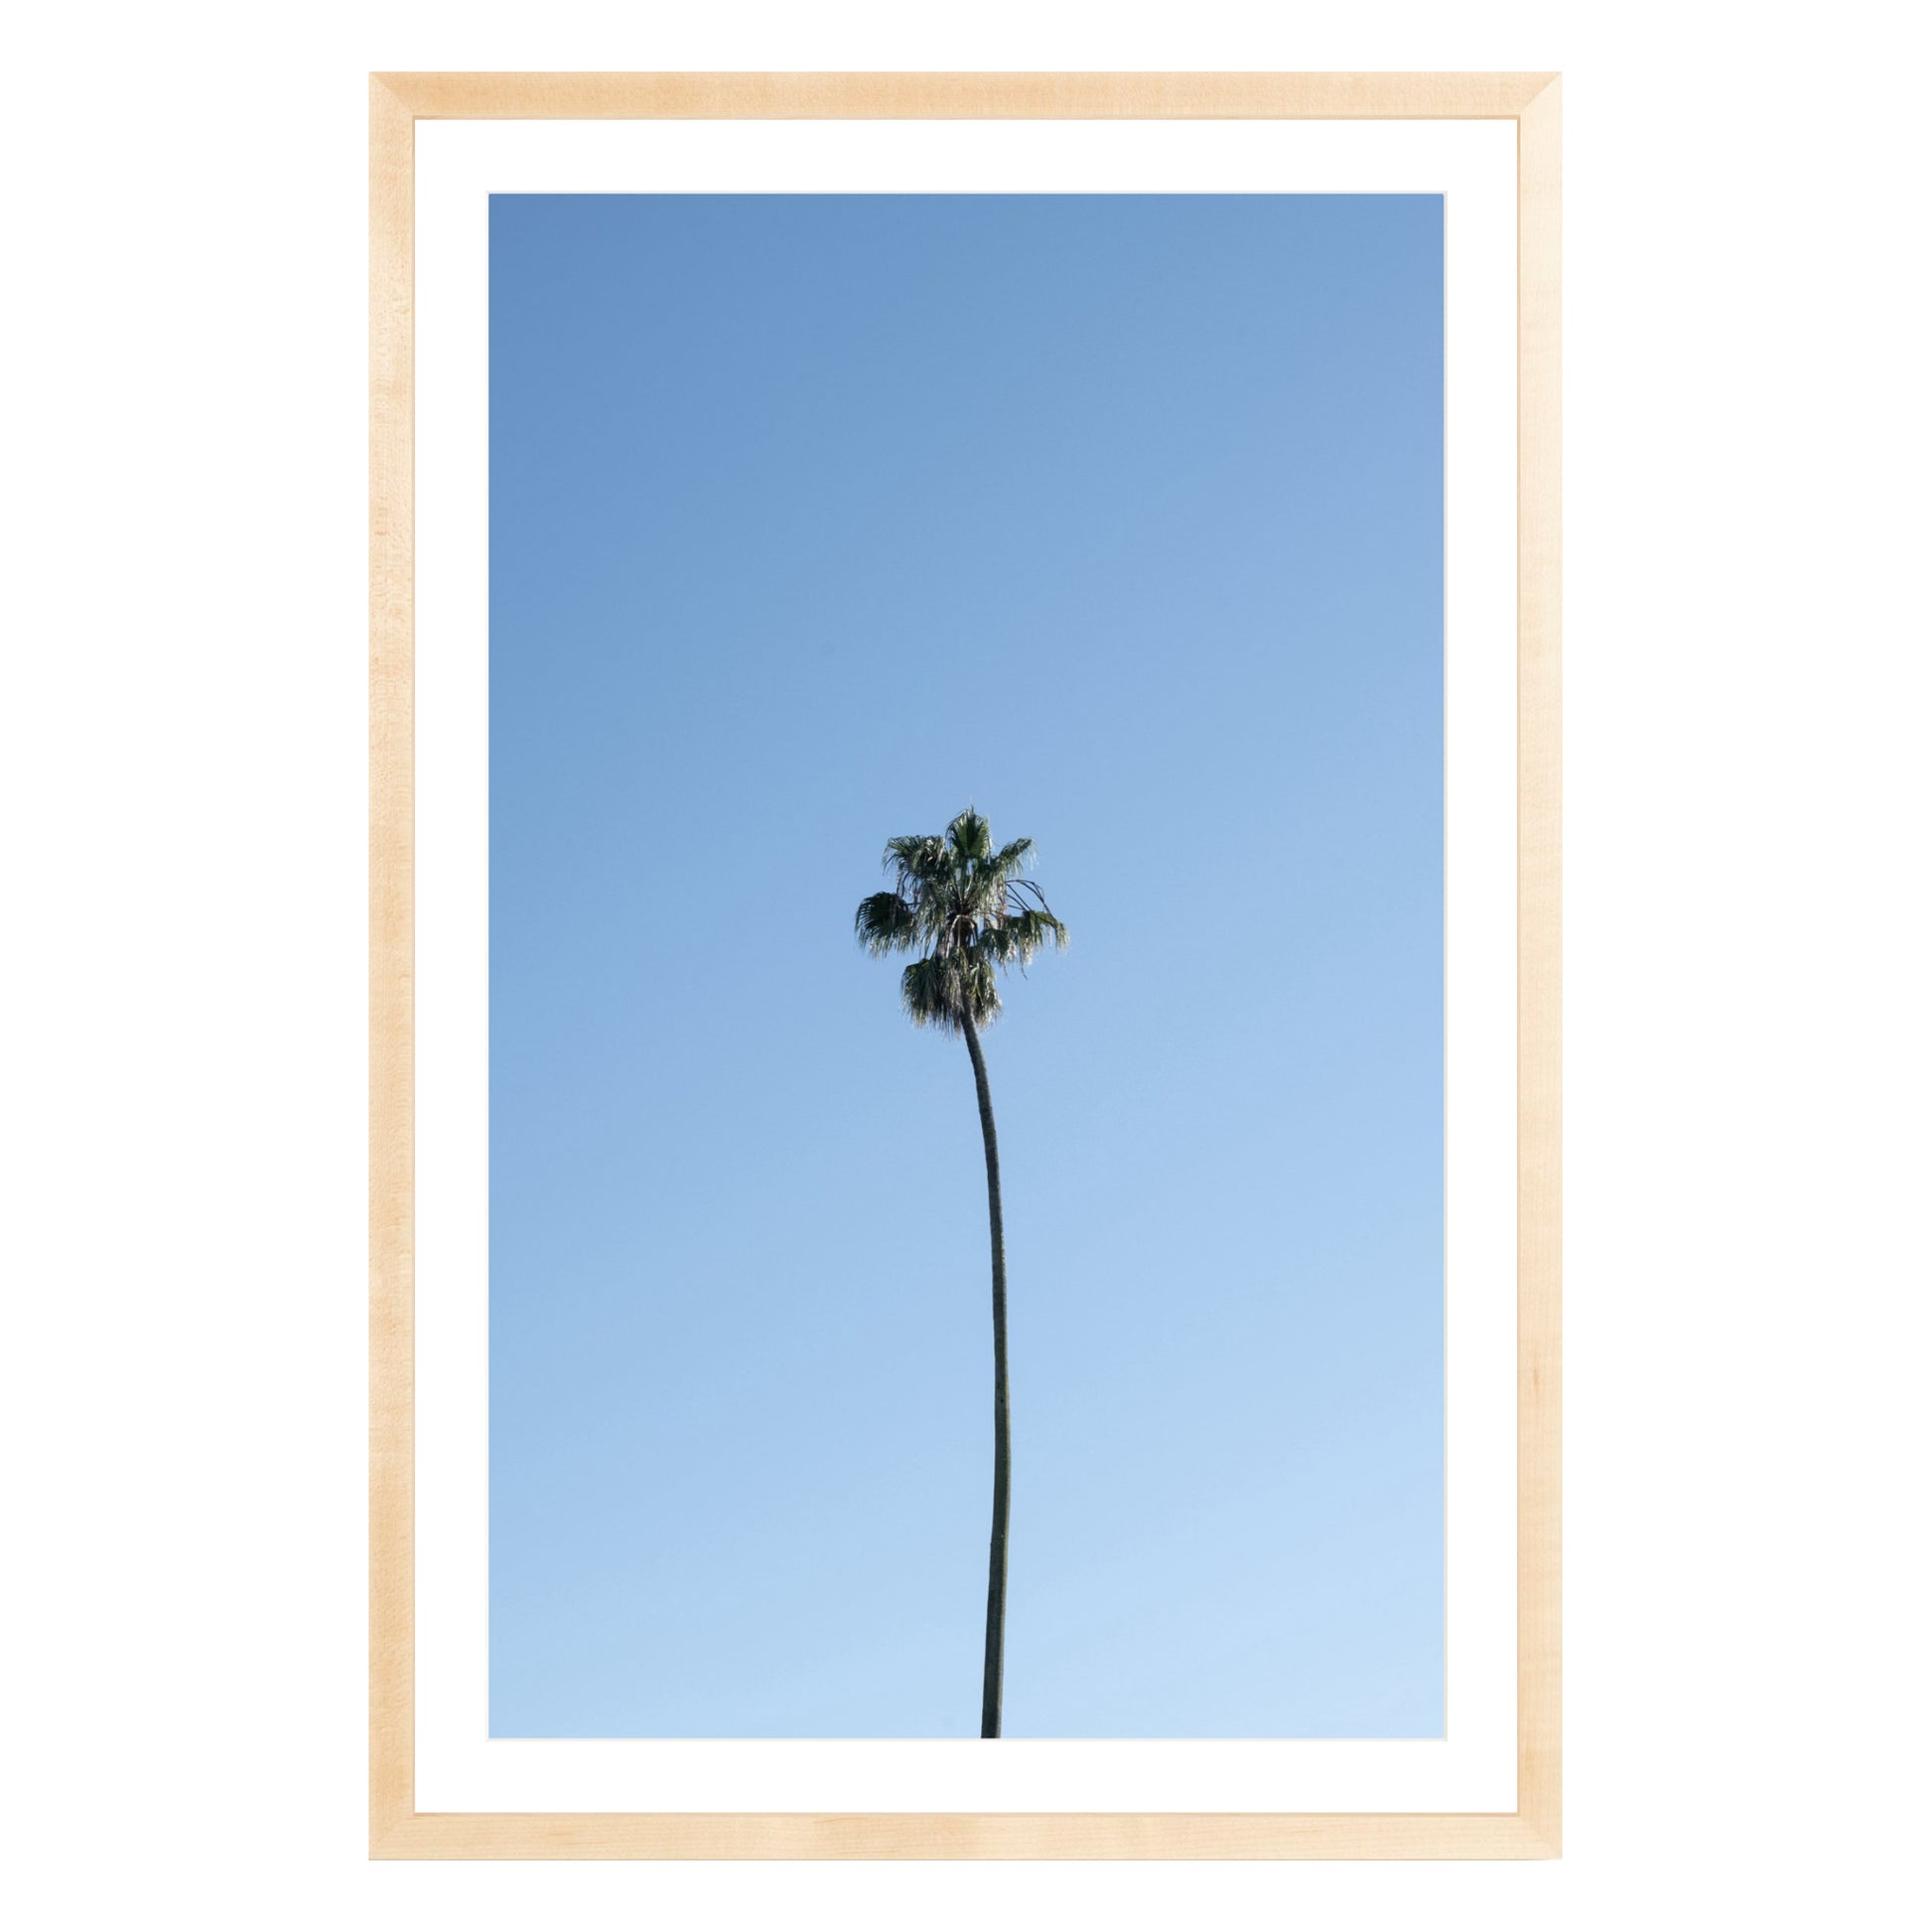 Photograph of single palm tree in front of blue sky in natural wood frame with white mat